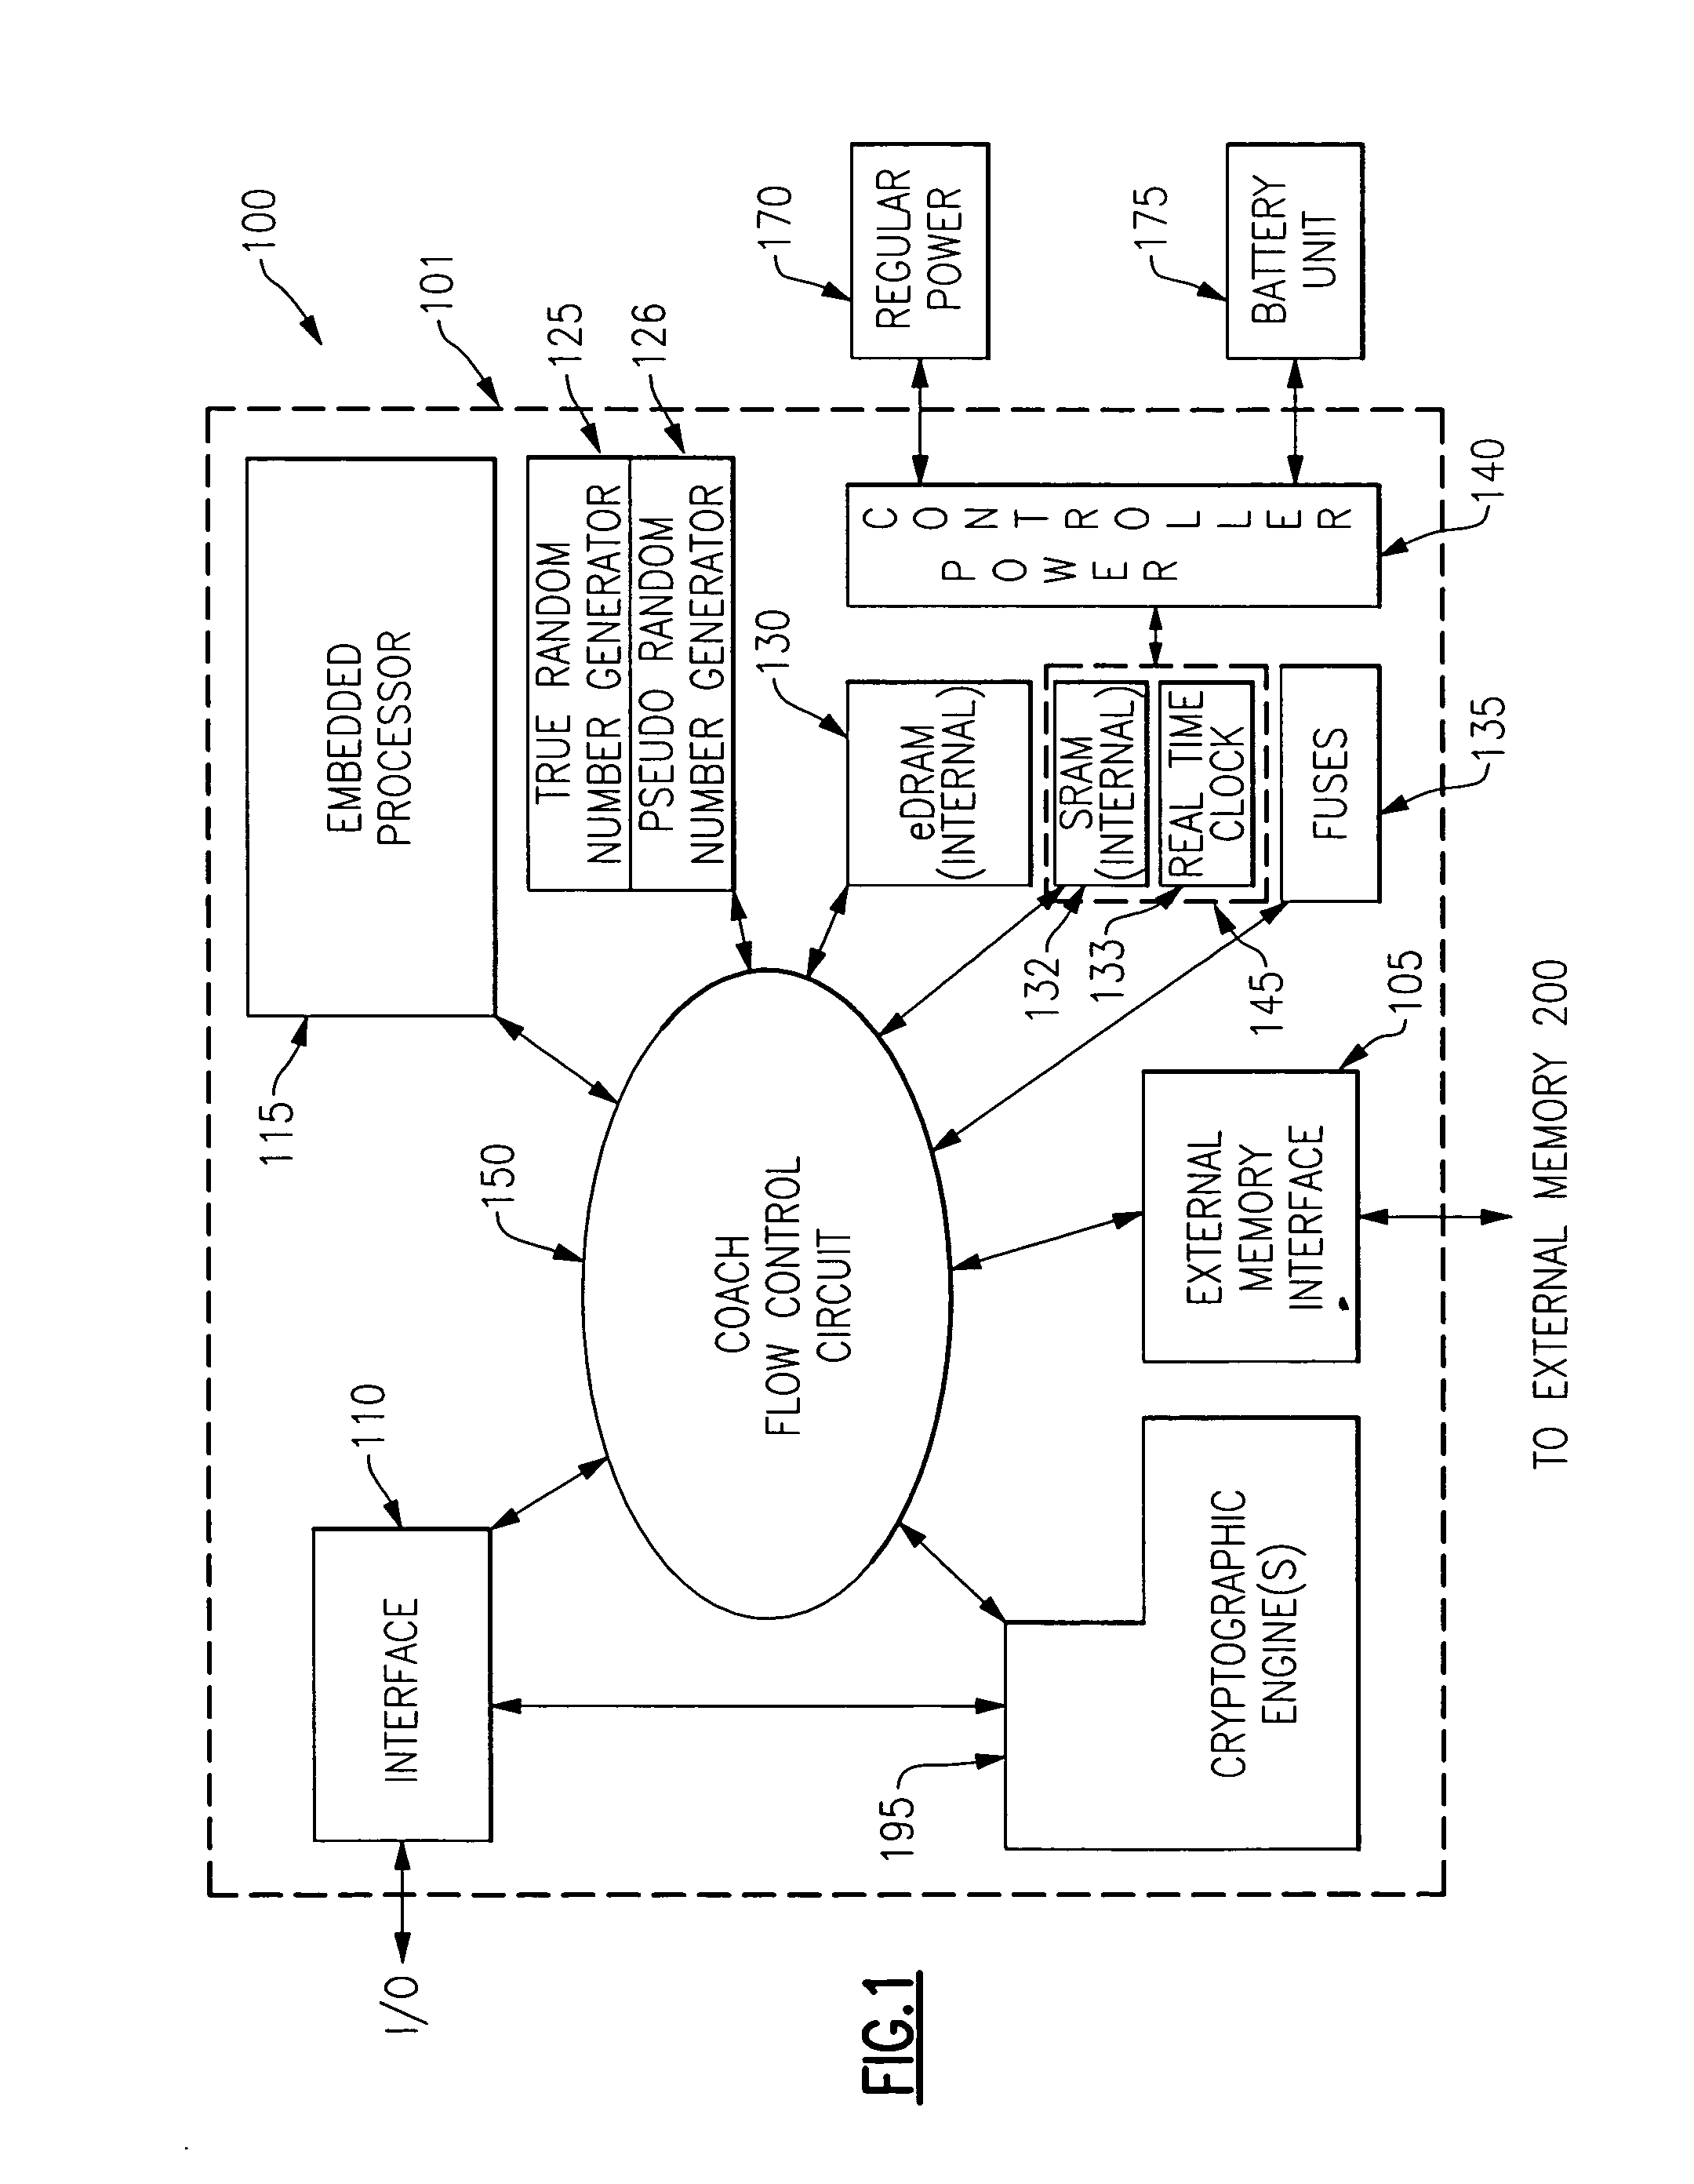 System for securely configuring a field programmable gate array or other programmable hardware